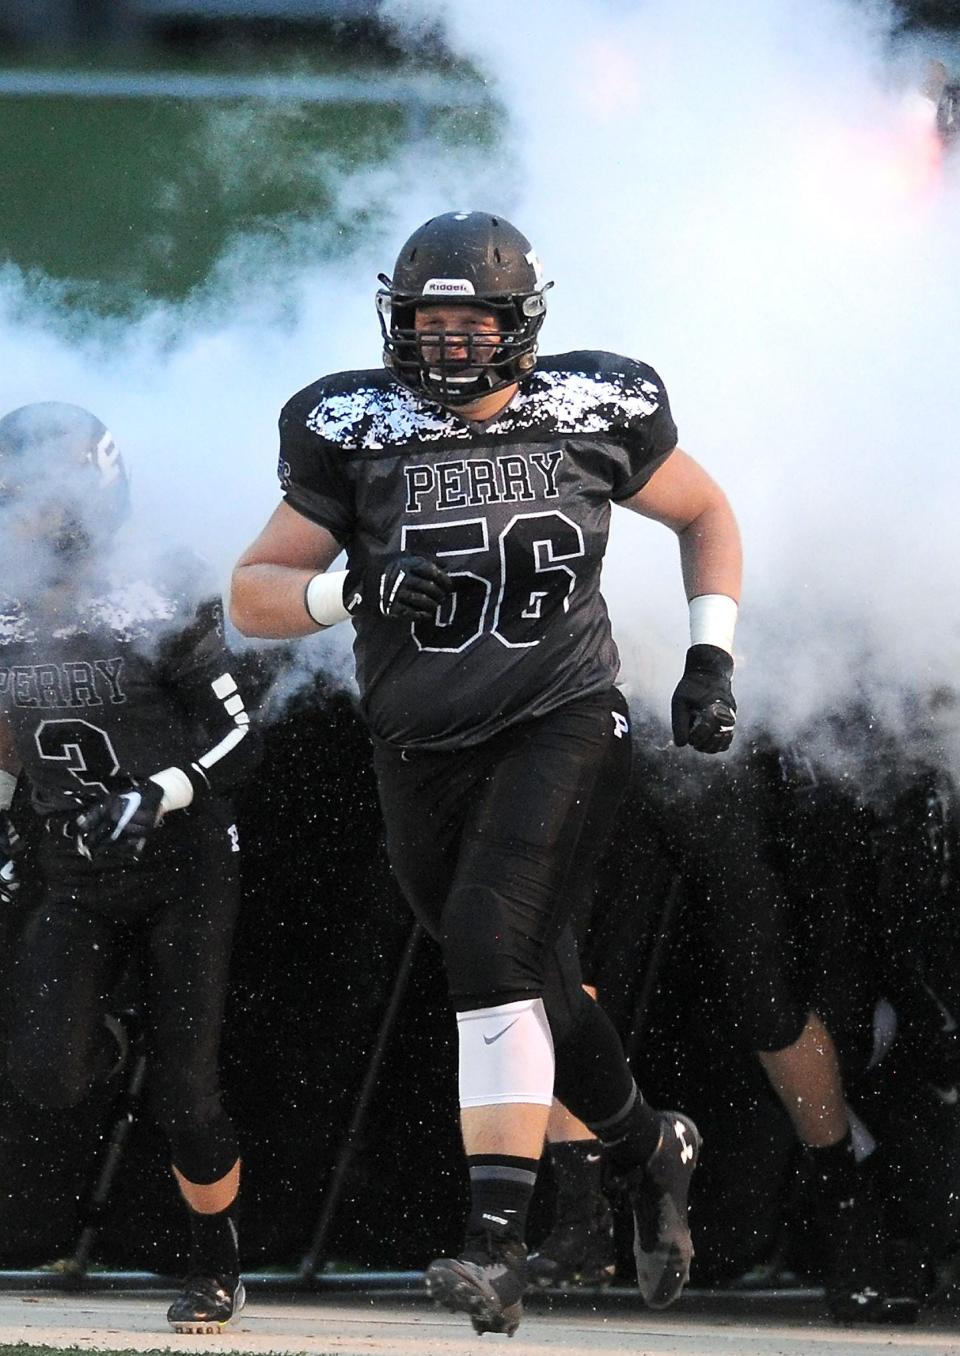 Matt Carrick takes the field for the Perry Panthers when he starred as a high school football player in Stark County.